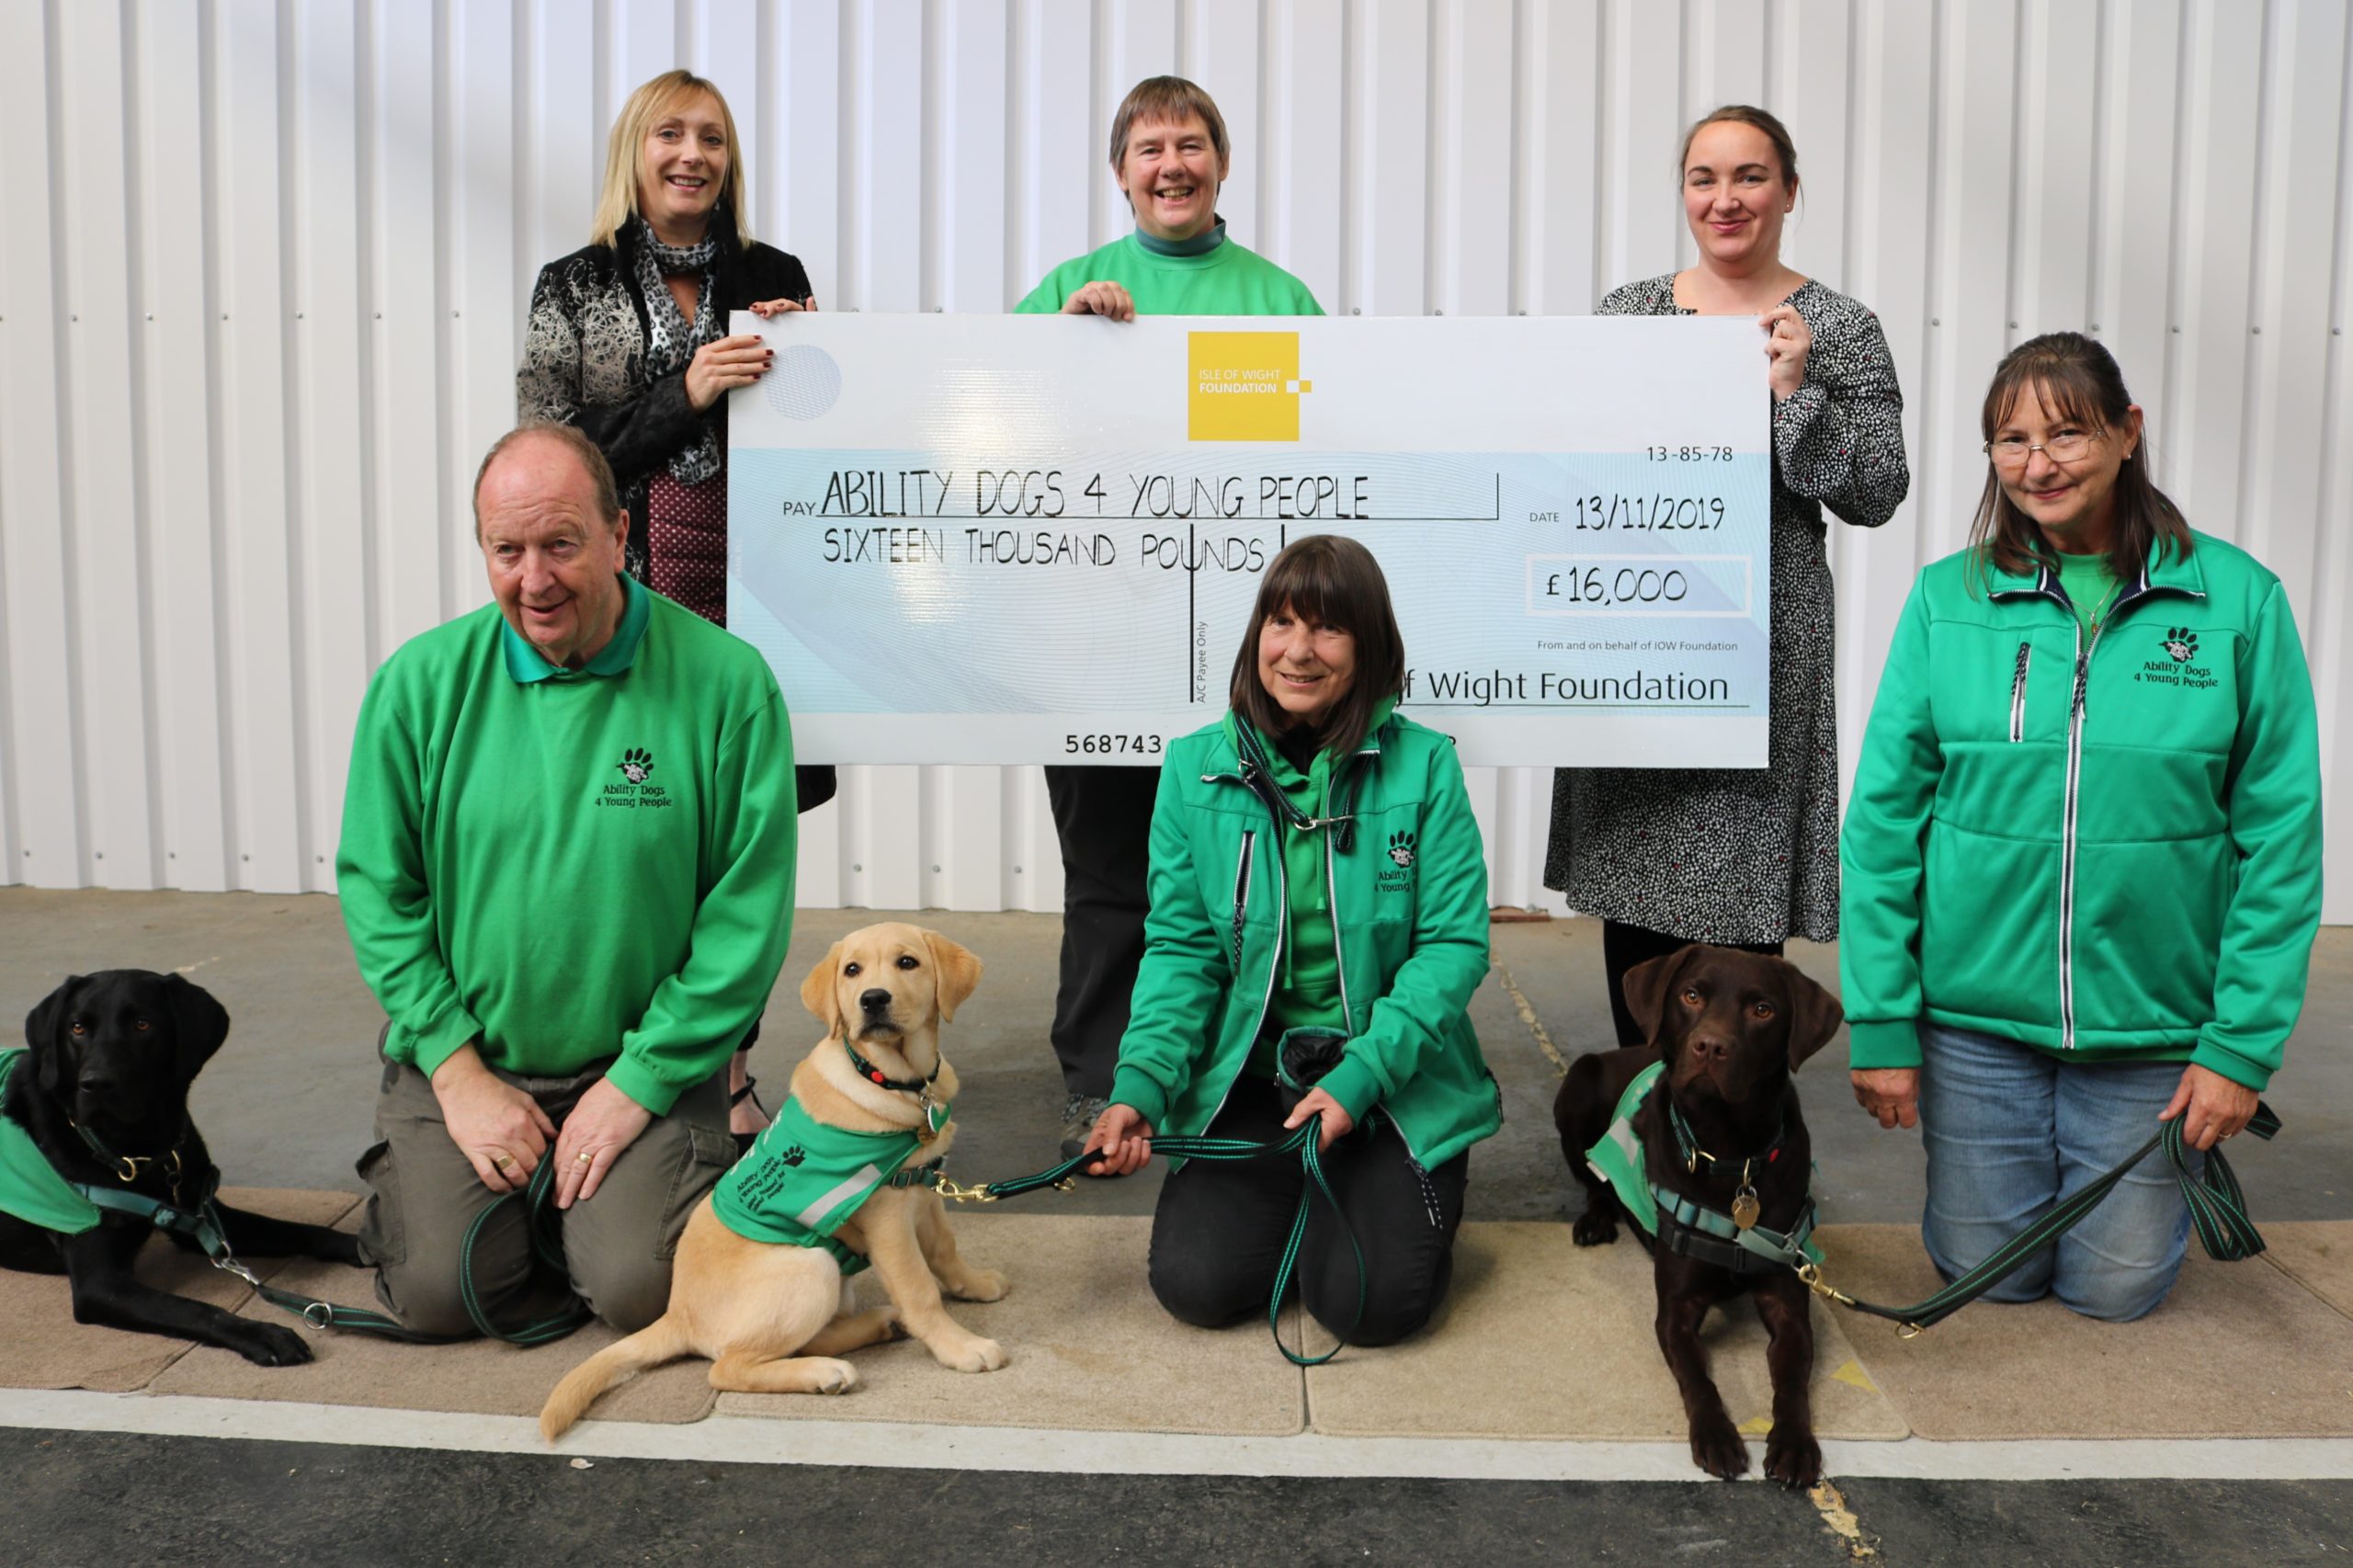 photo showing adults from Island Roads and Ability Dogs for Young People charity with dogs and a large cheque